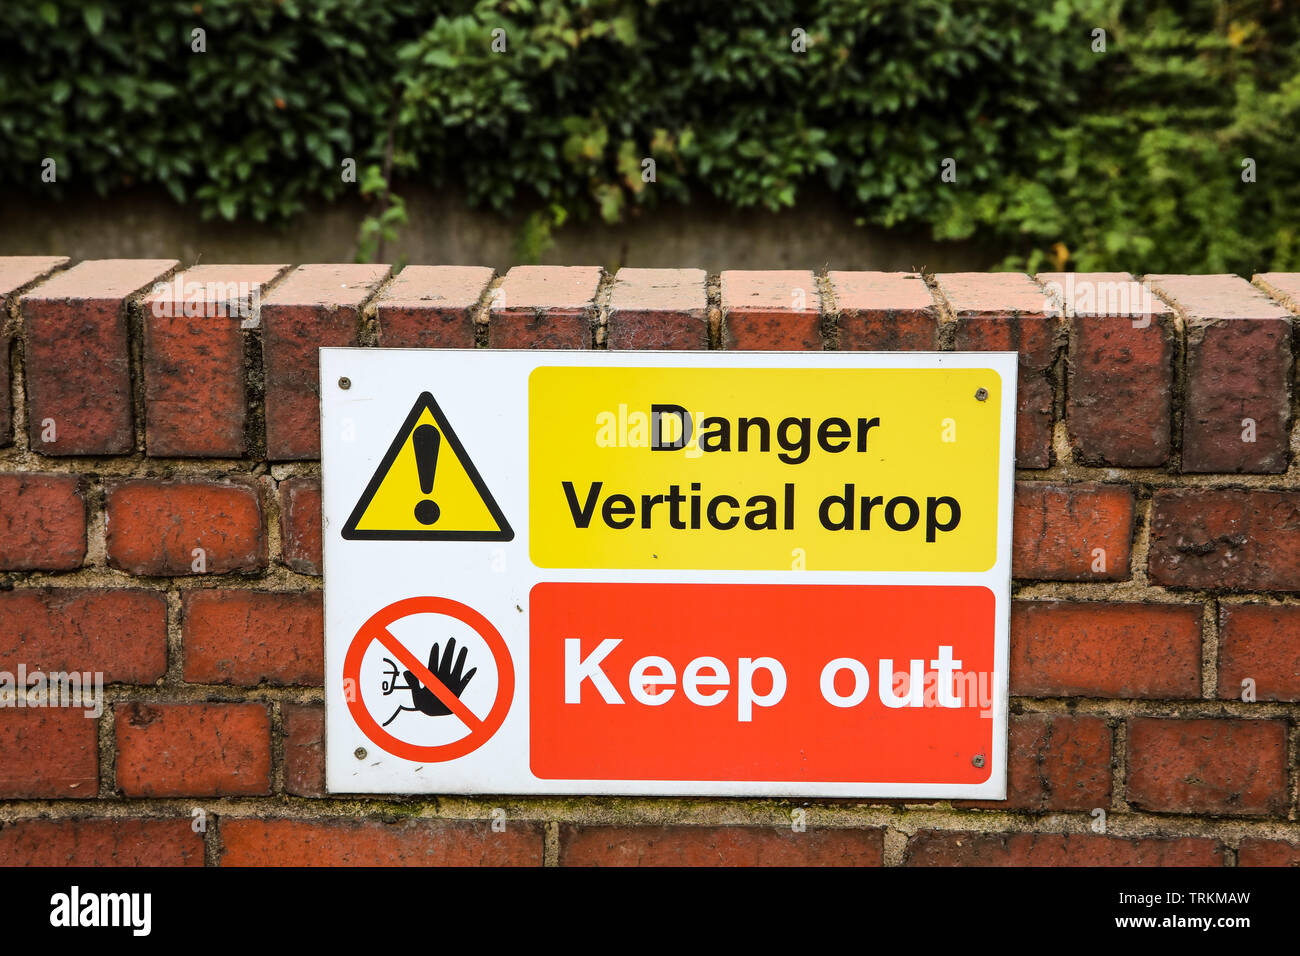 Danger Vertical Drop Sign and Keep Out Sign Stock Photo